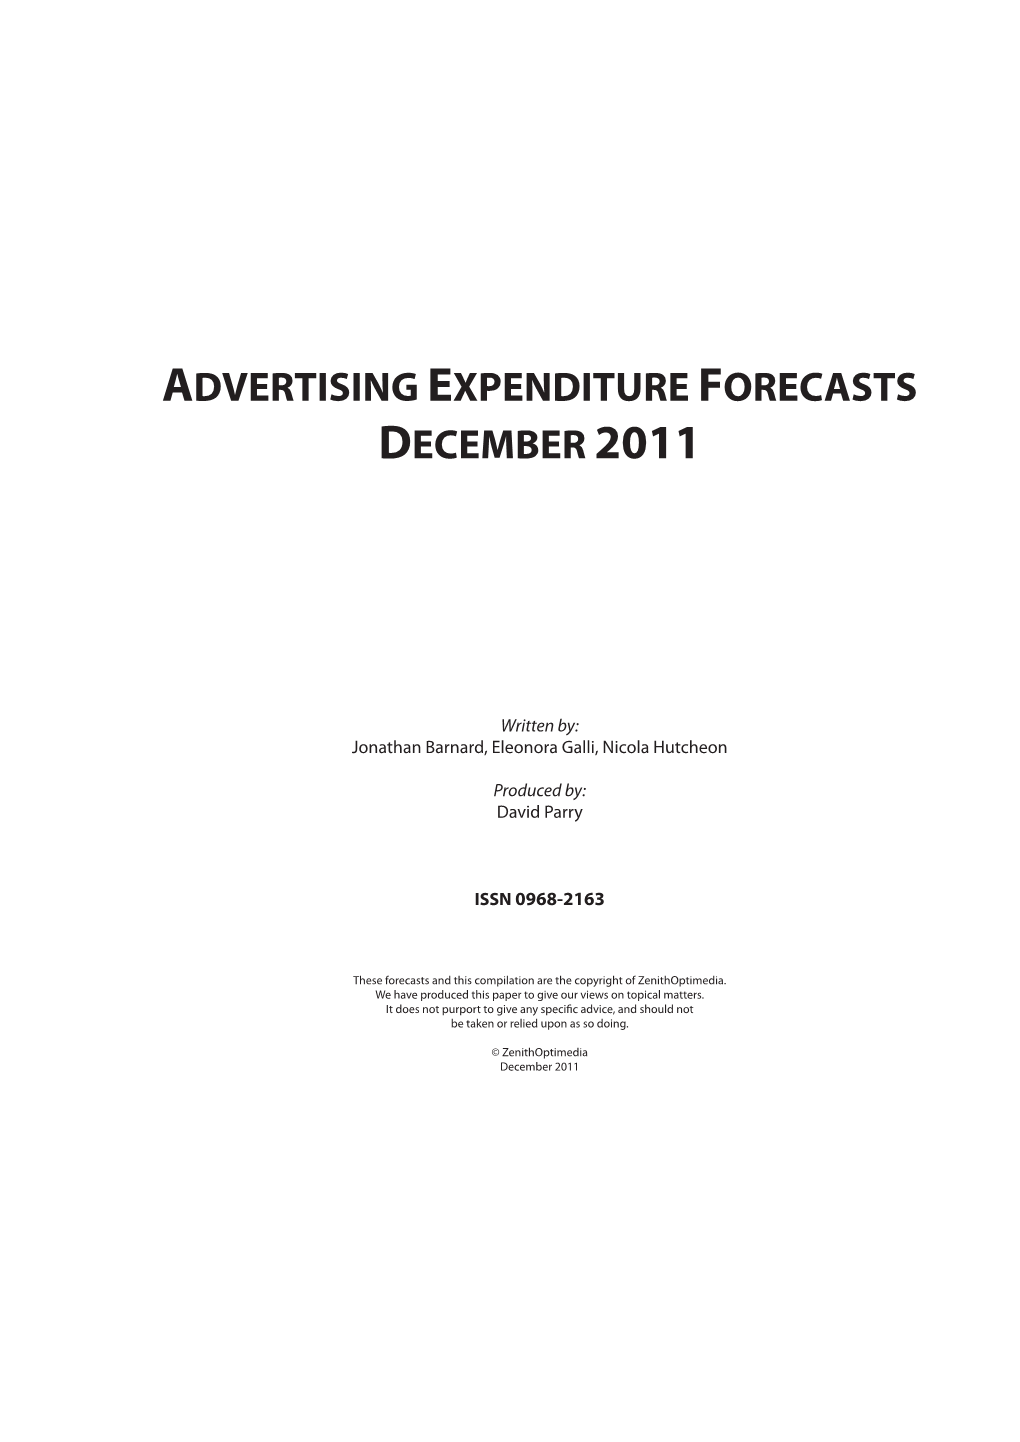 Advertising Expenditure Forecasts December 2011